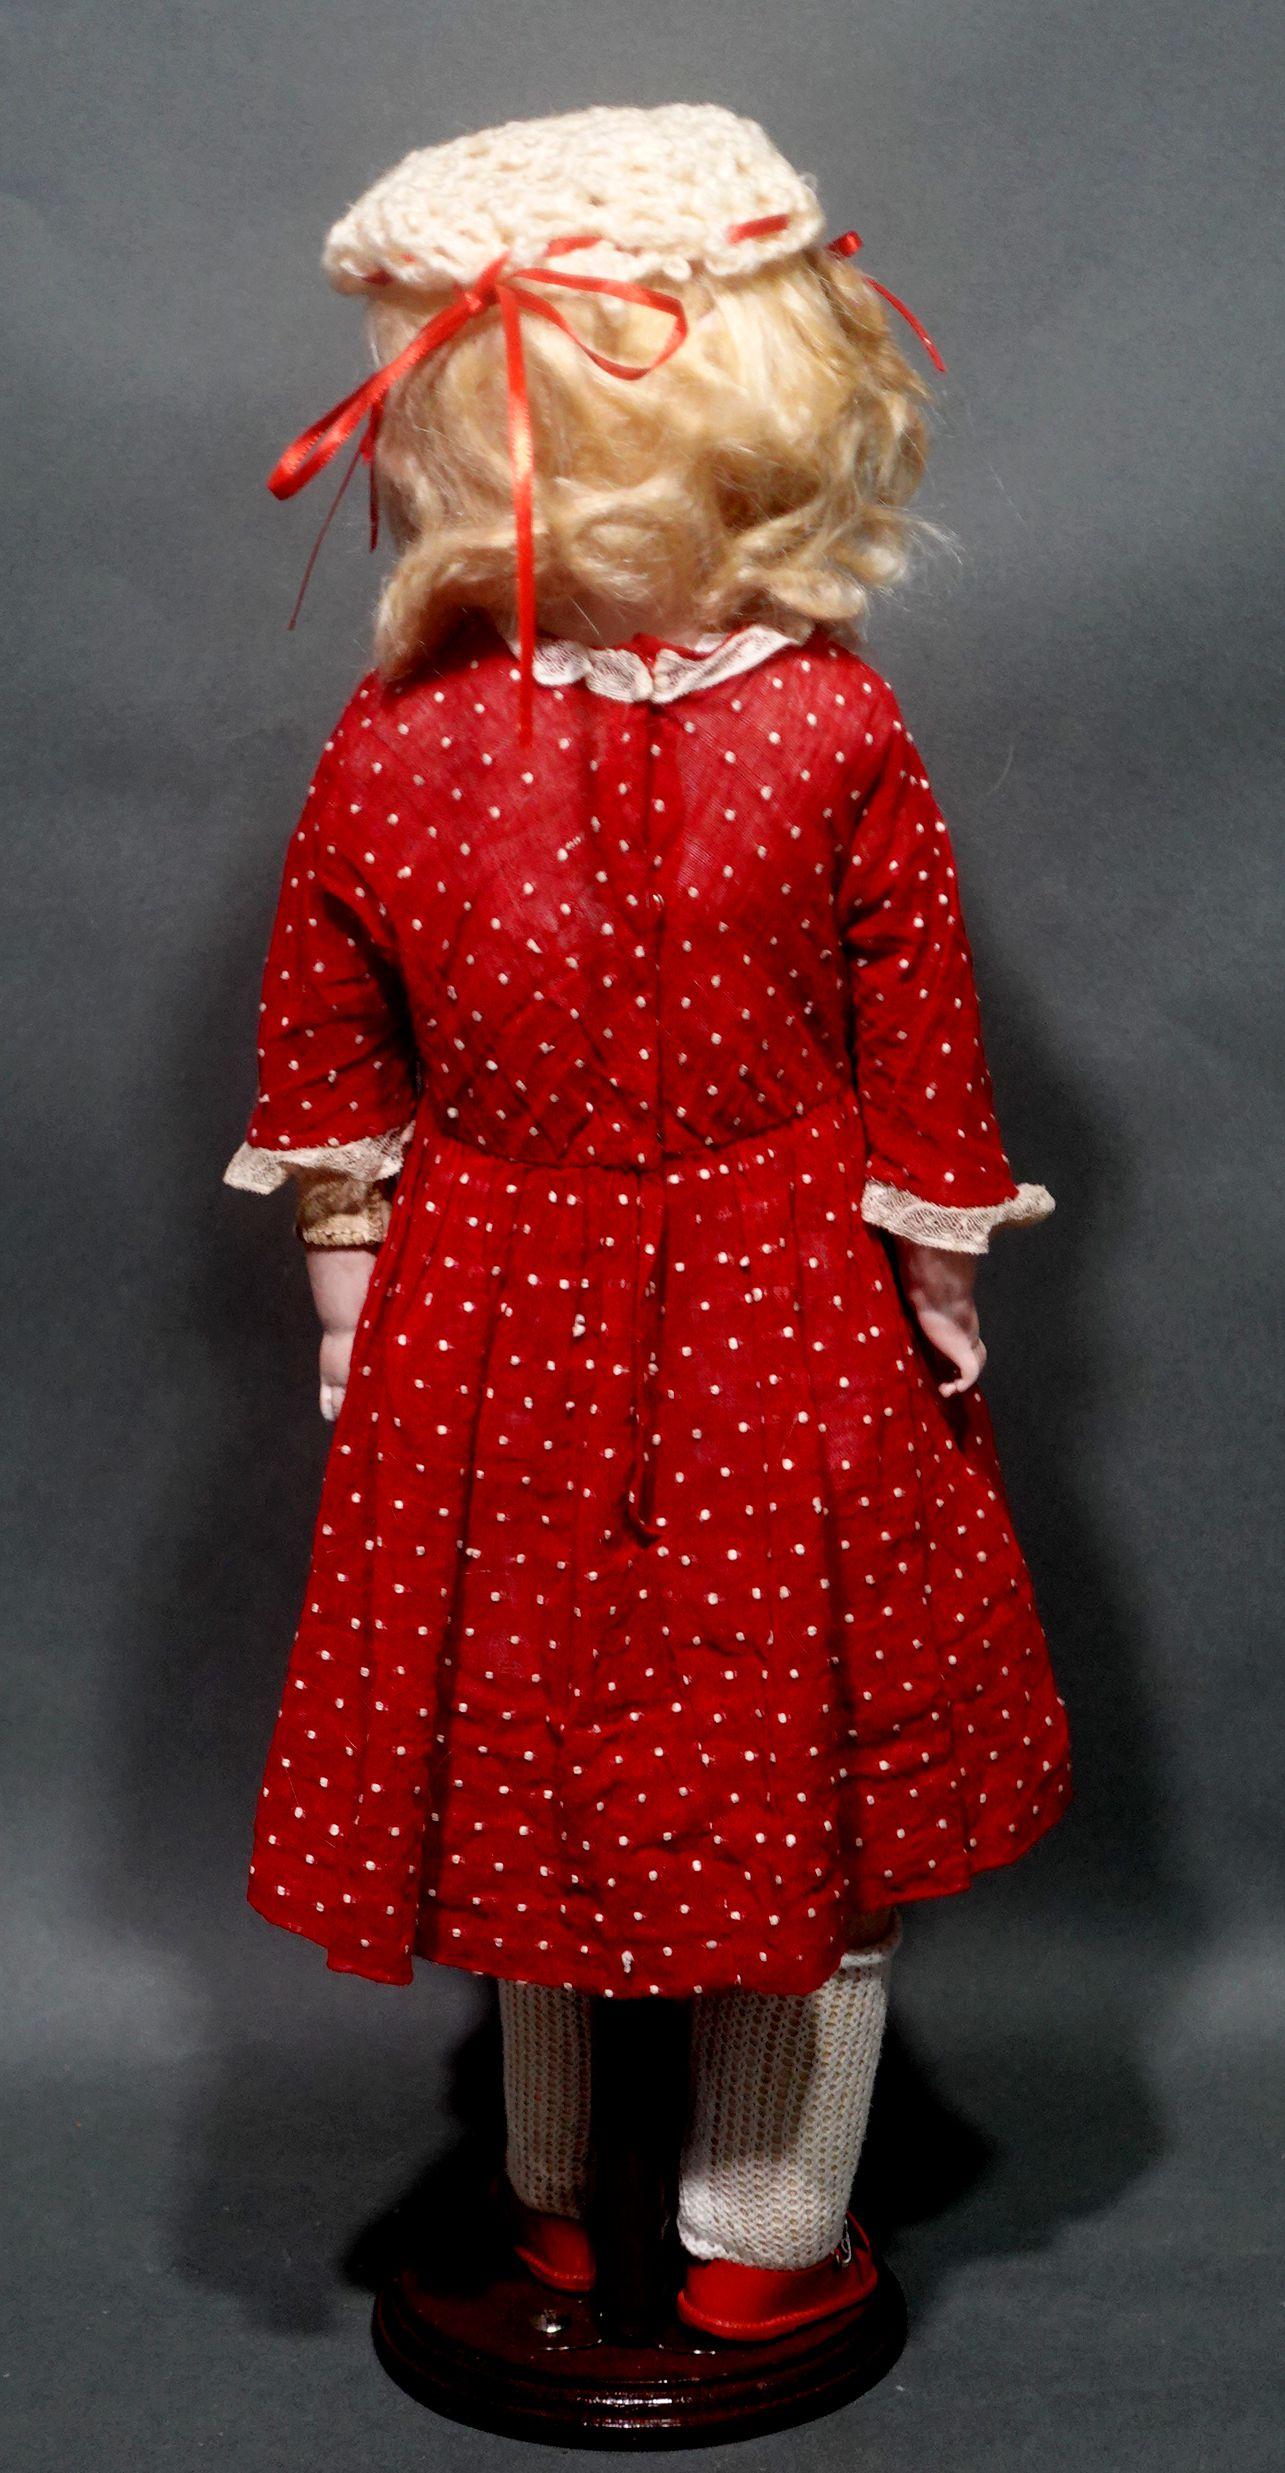 Antique German Bisque Doll Armand Marseille, Ric#007 In Good Condition For Sale In Norton, MA